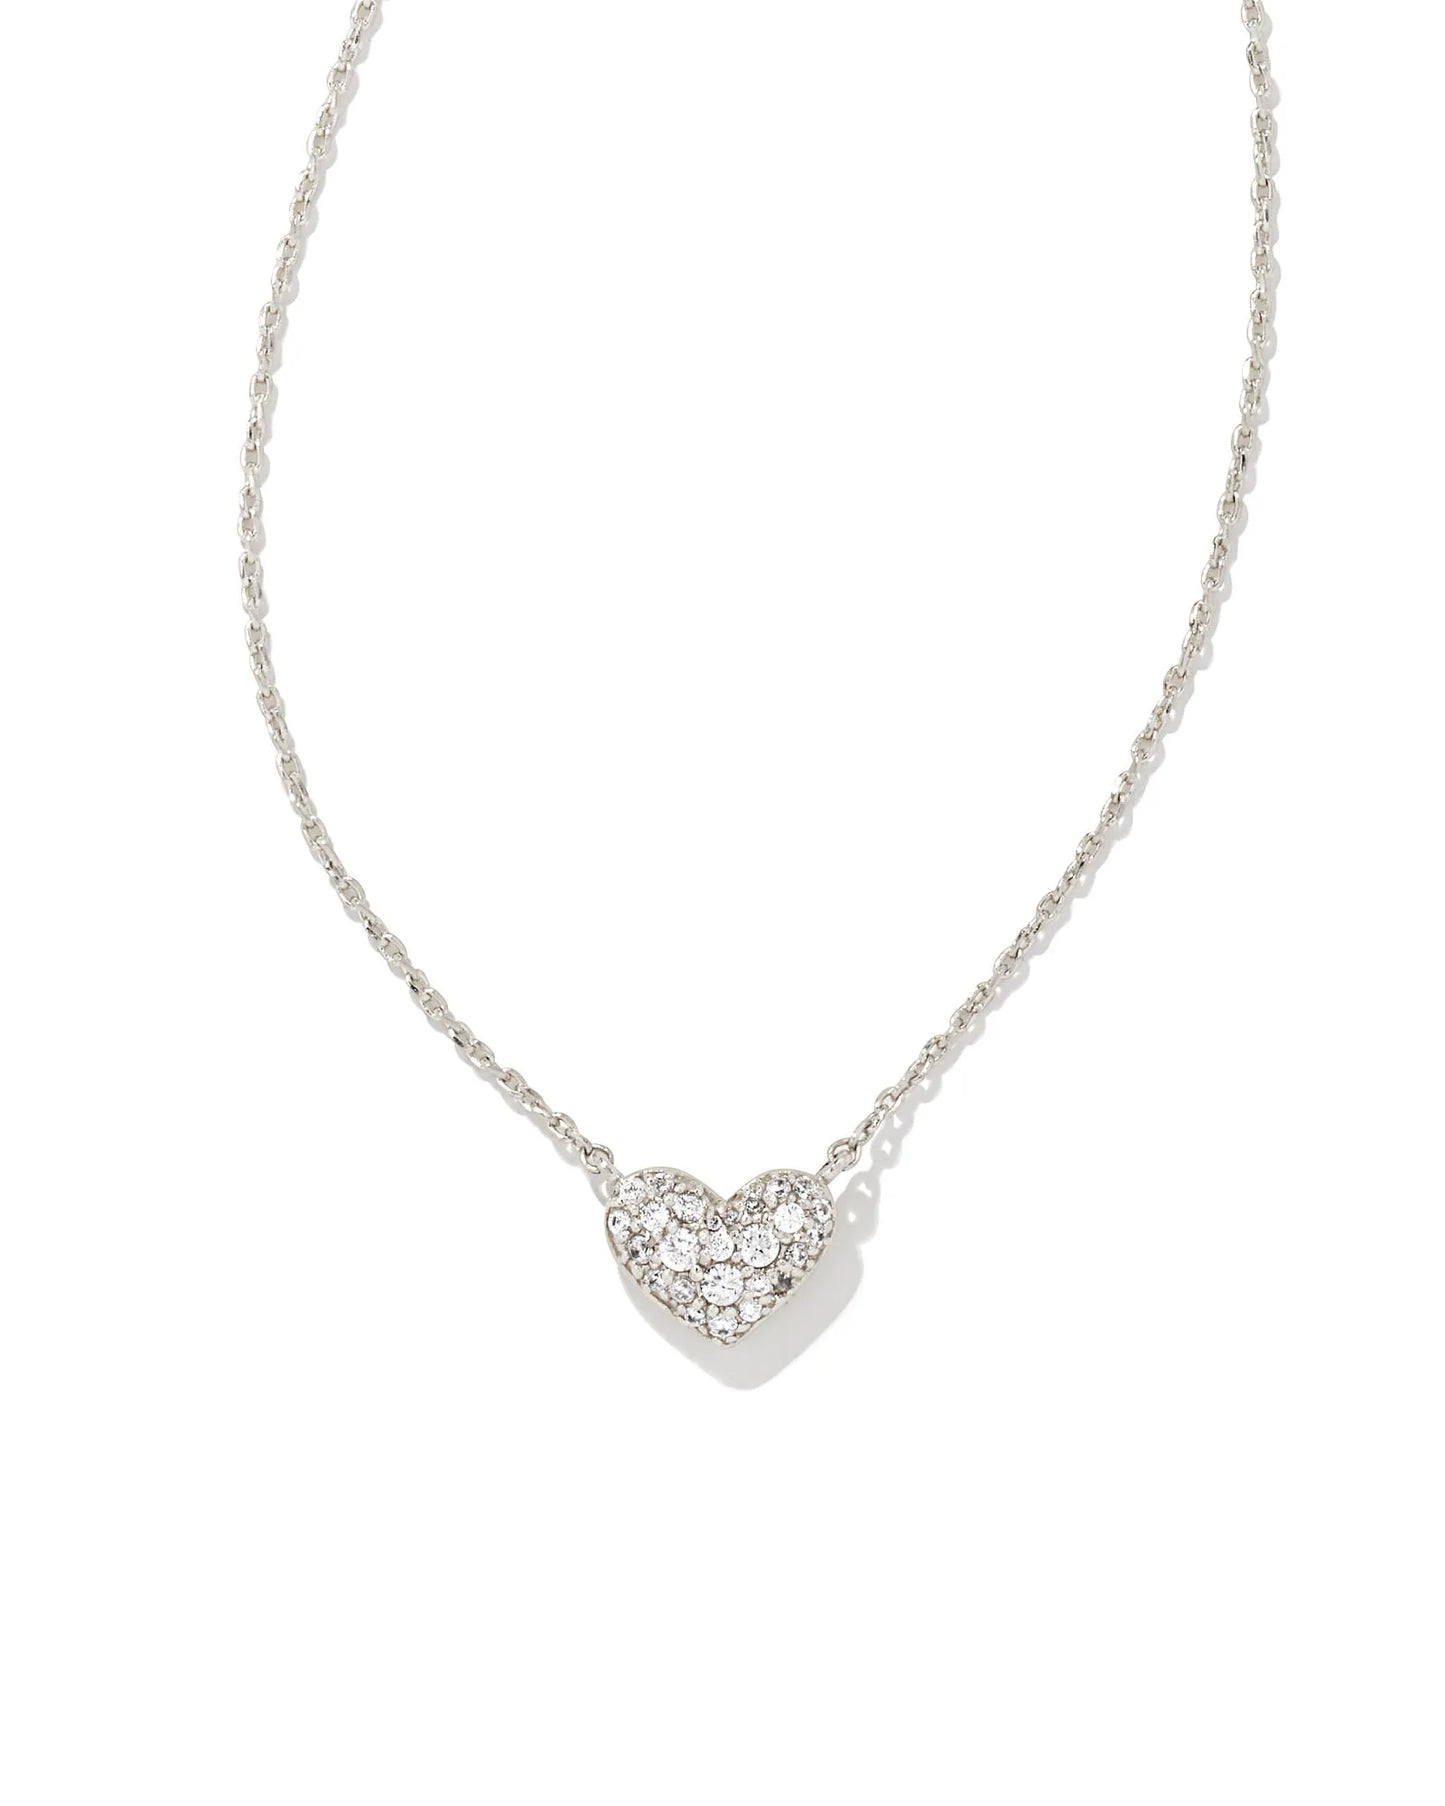 Ari Gold Pave Crystal Heart Necklace in White Crystal (Gold or Silver)